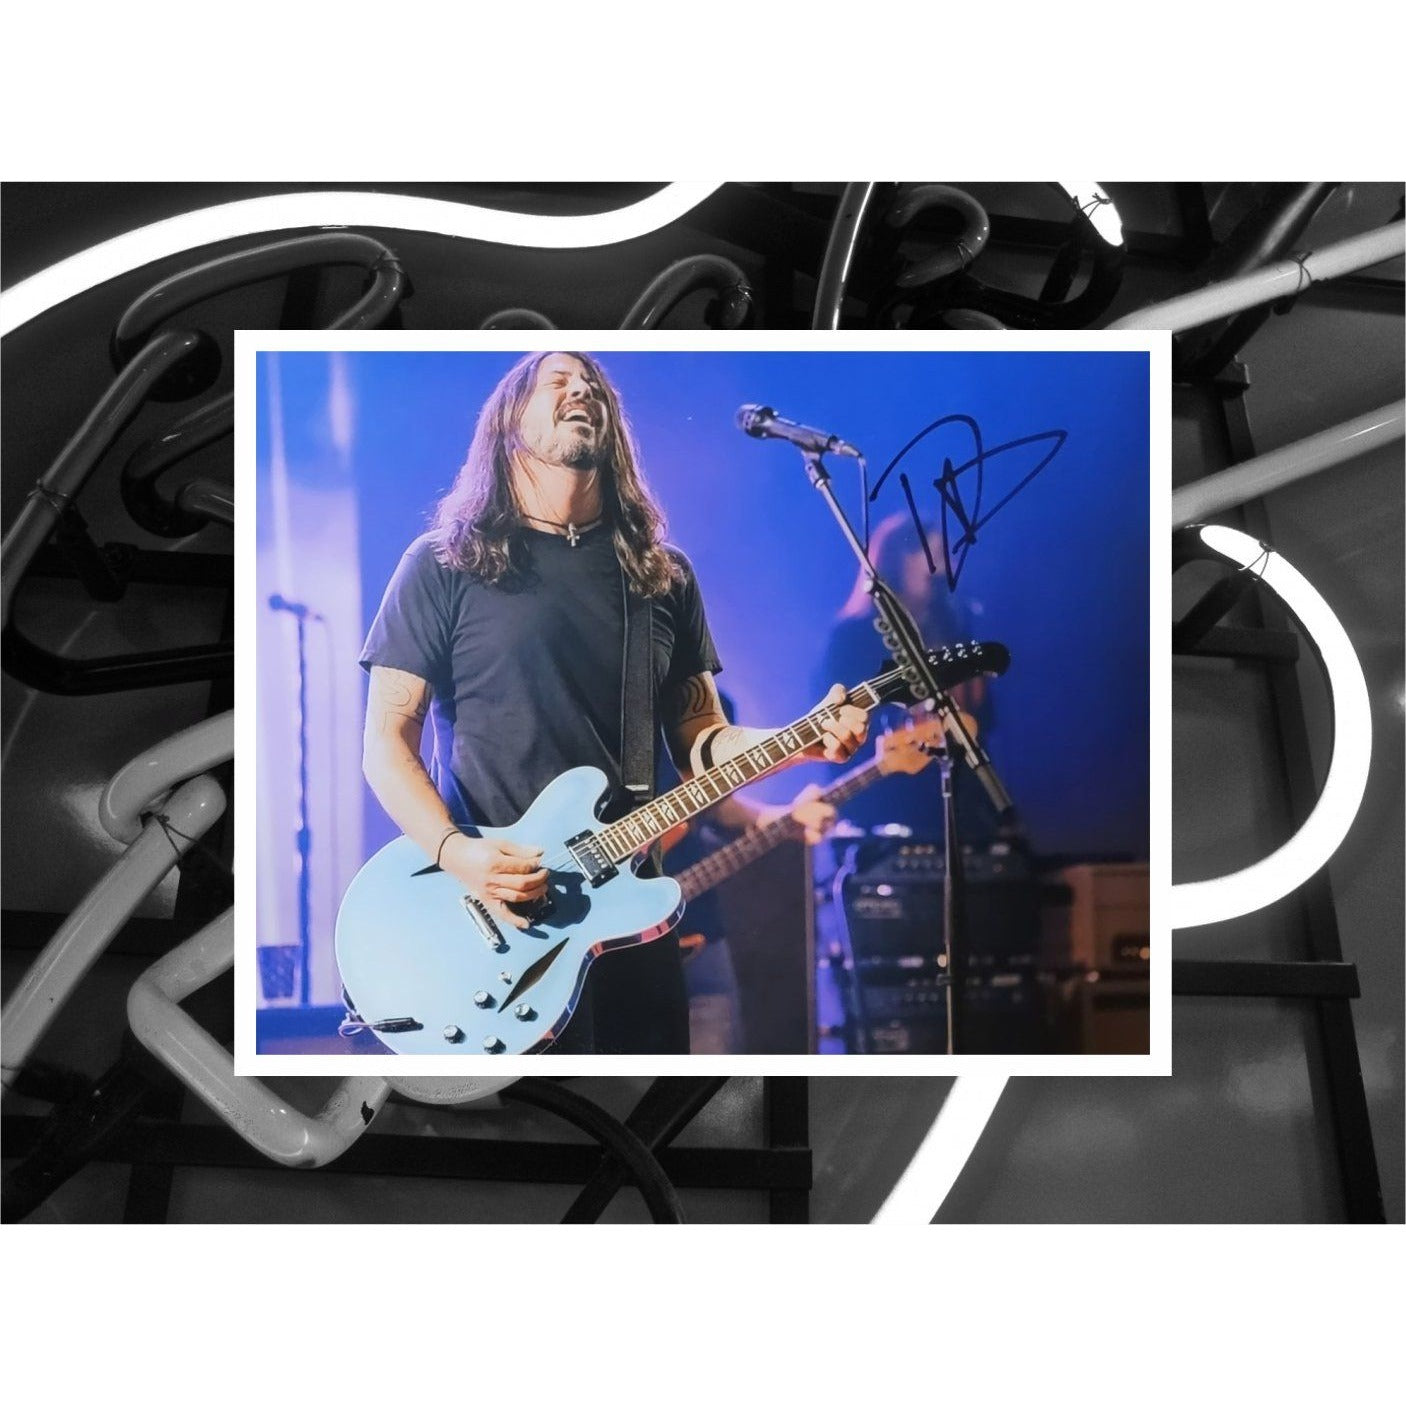 David Grohl Foo Fighters 8 by 10 photo sign with proof